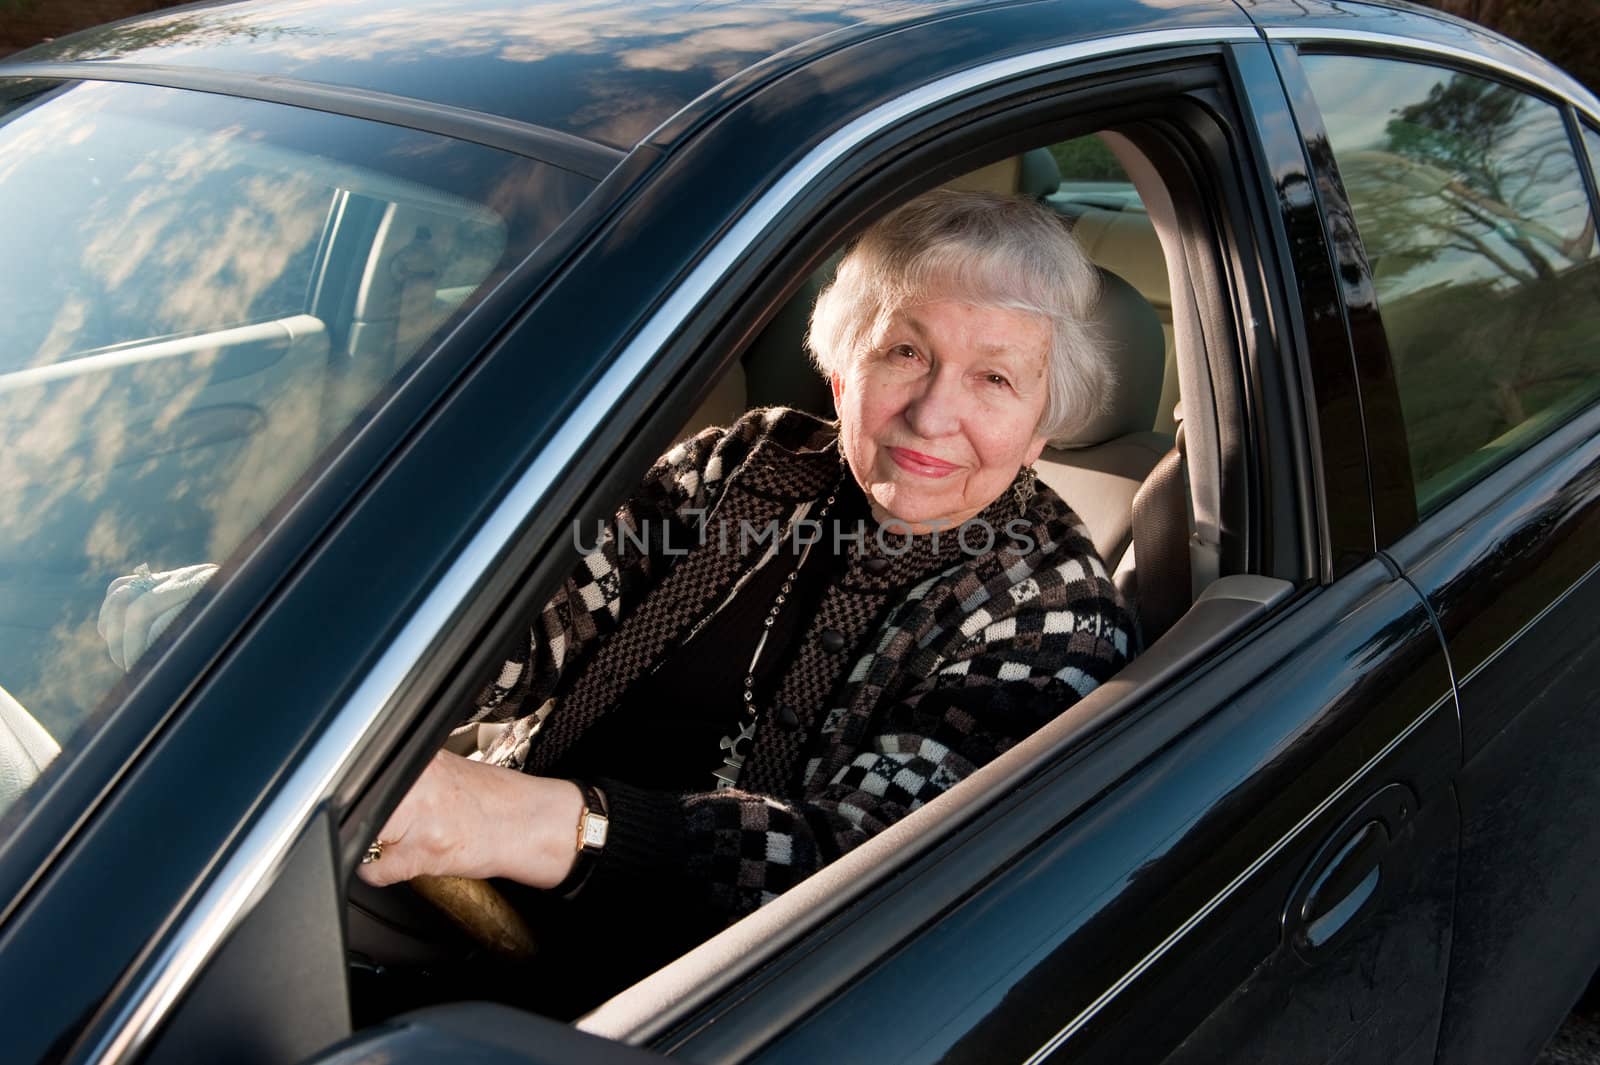 86 year old woman at her home, drivingn her car by rongreer